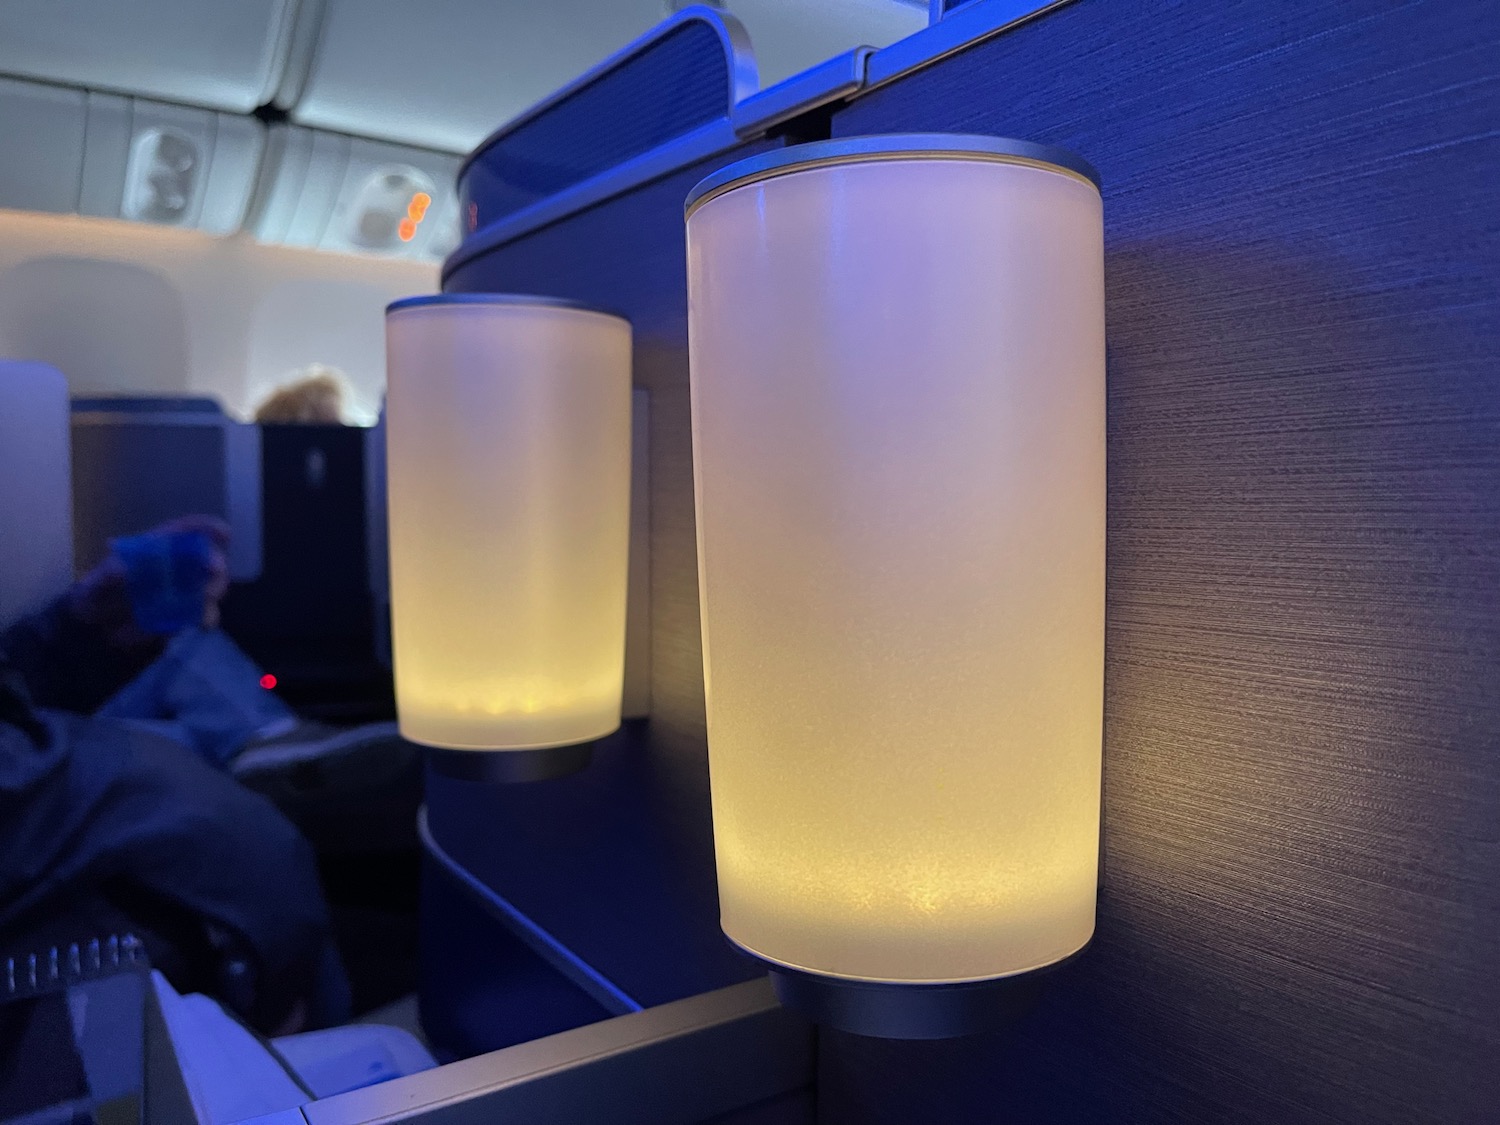 a pair of lights on a plane